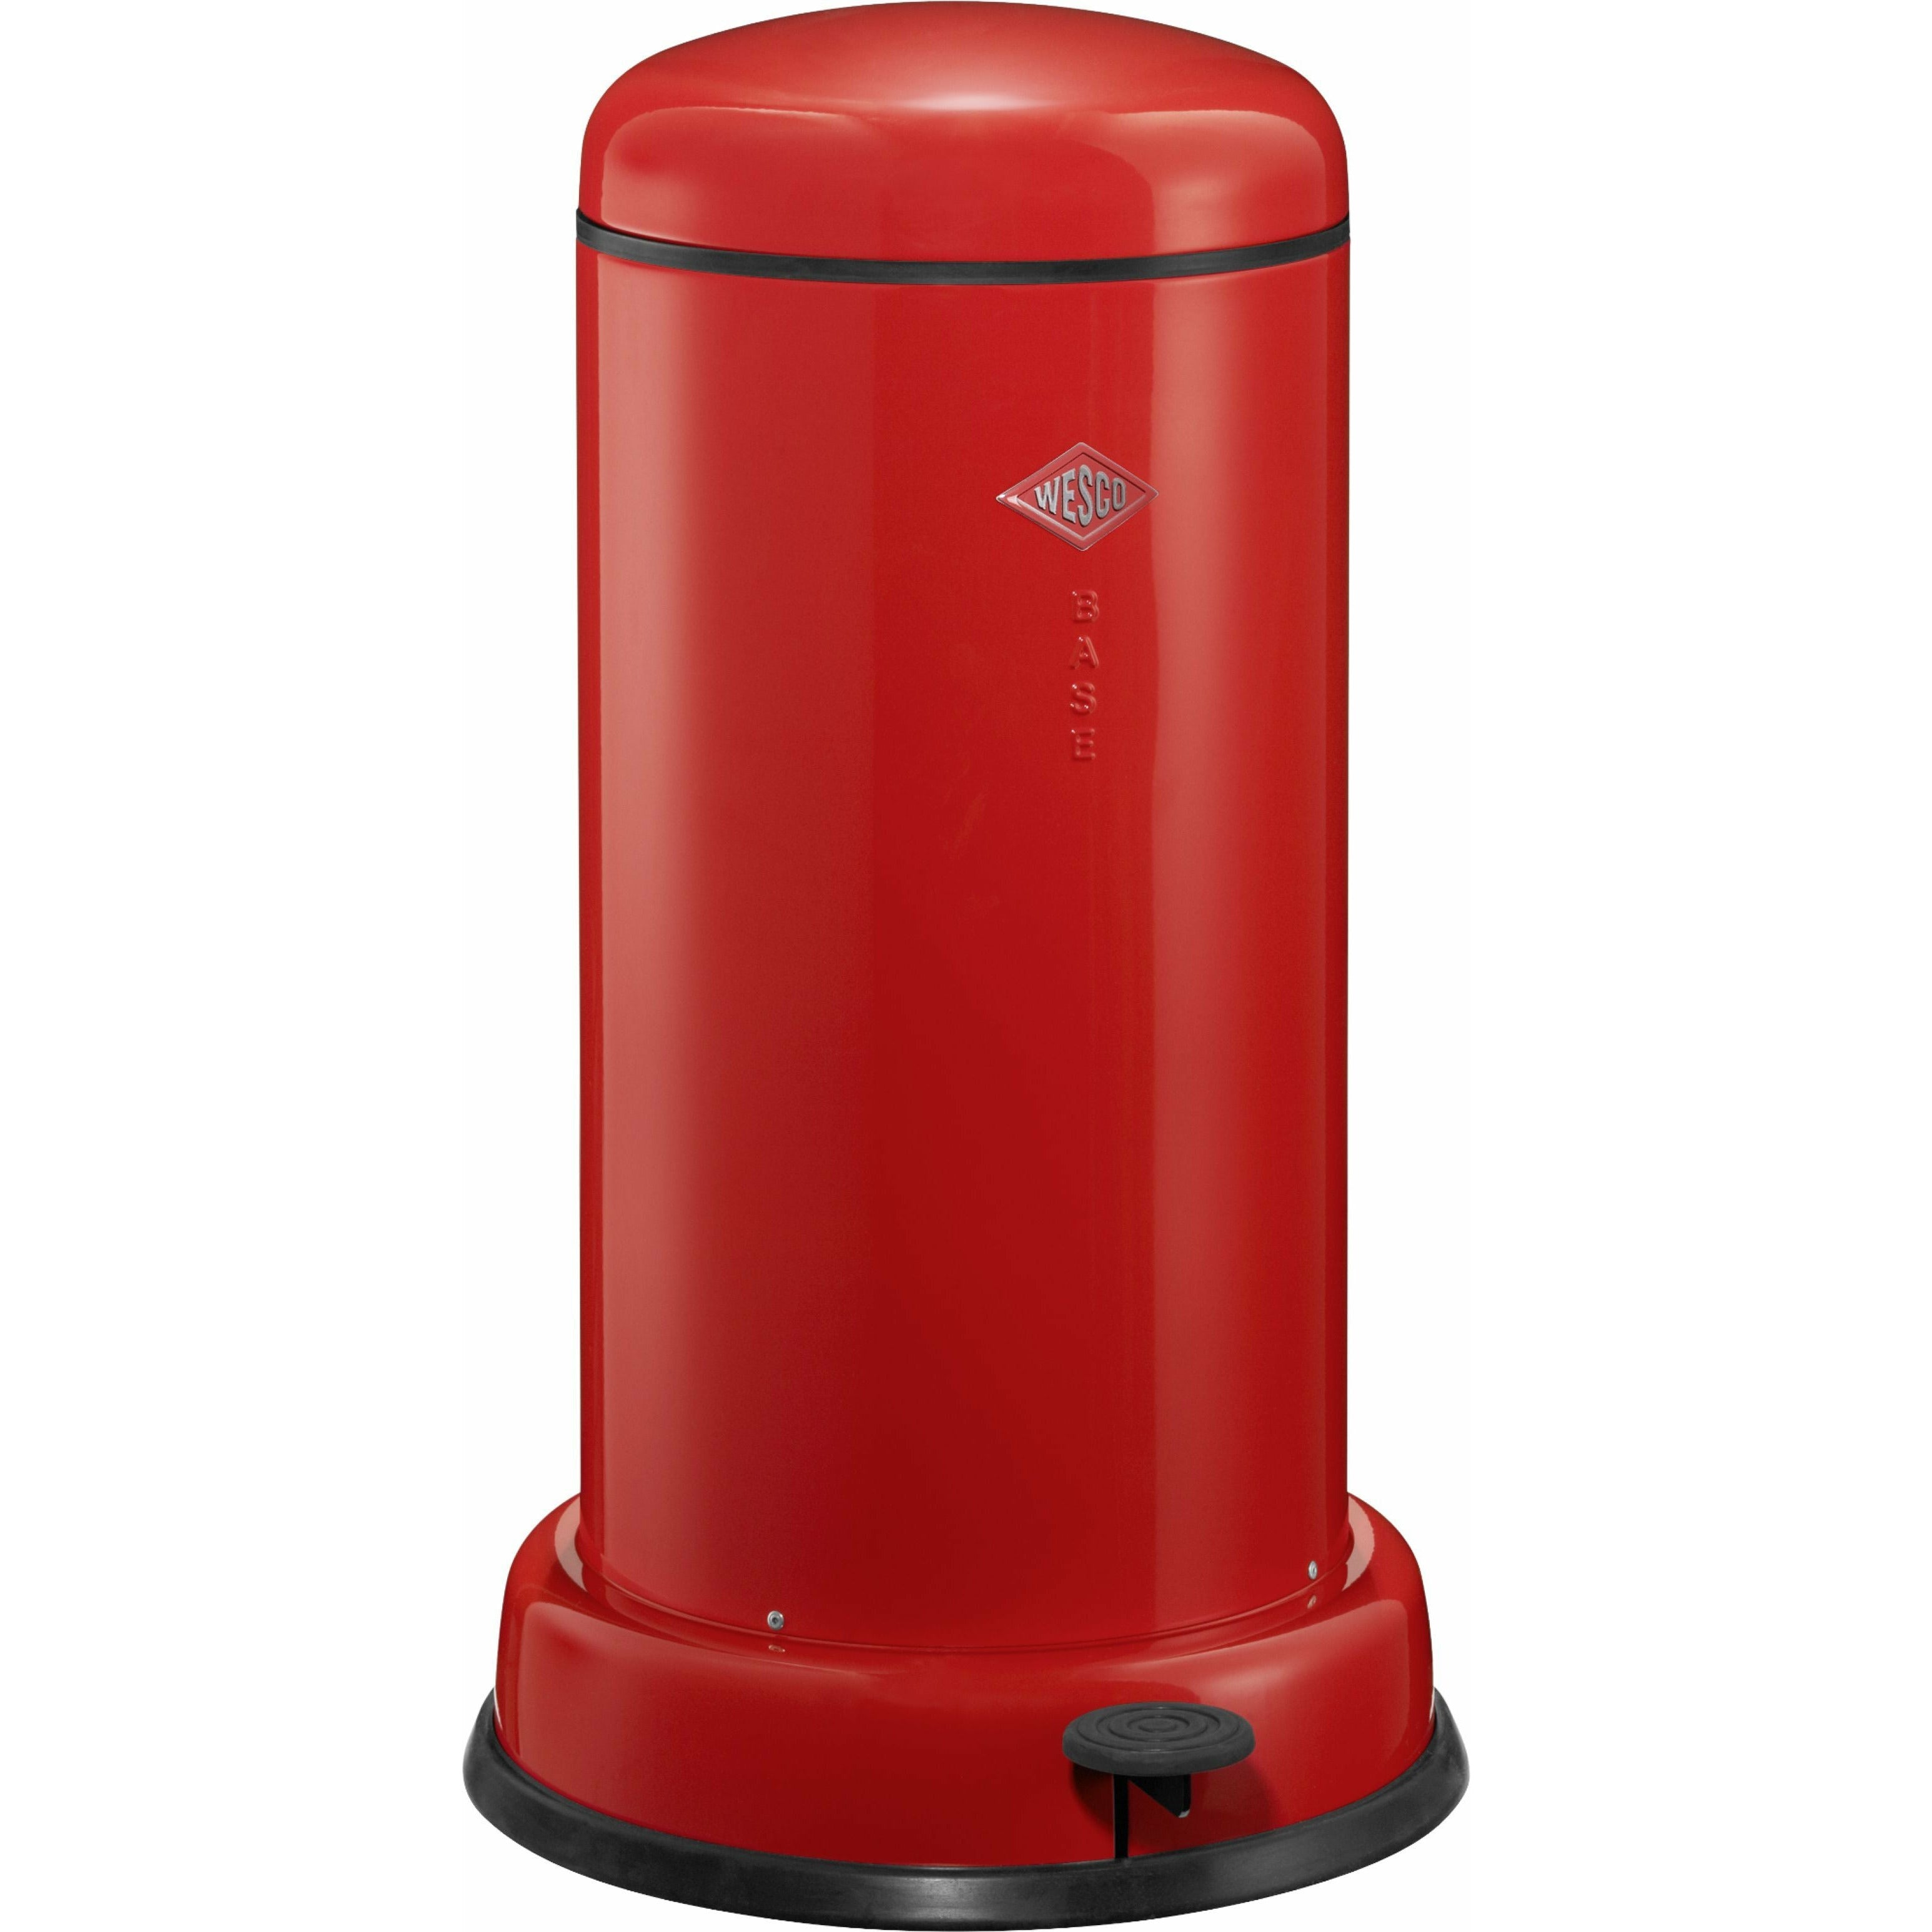 Wesco Baseboy 20 Litres, Red